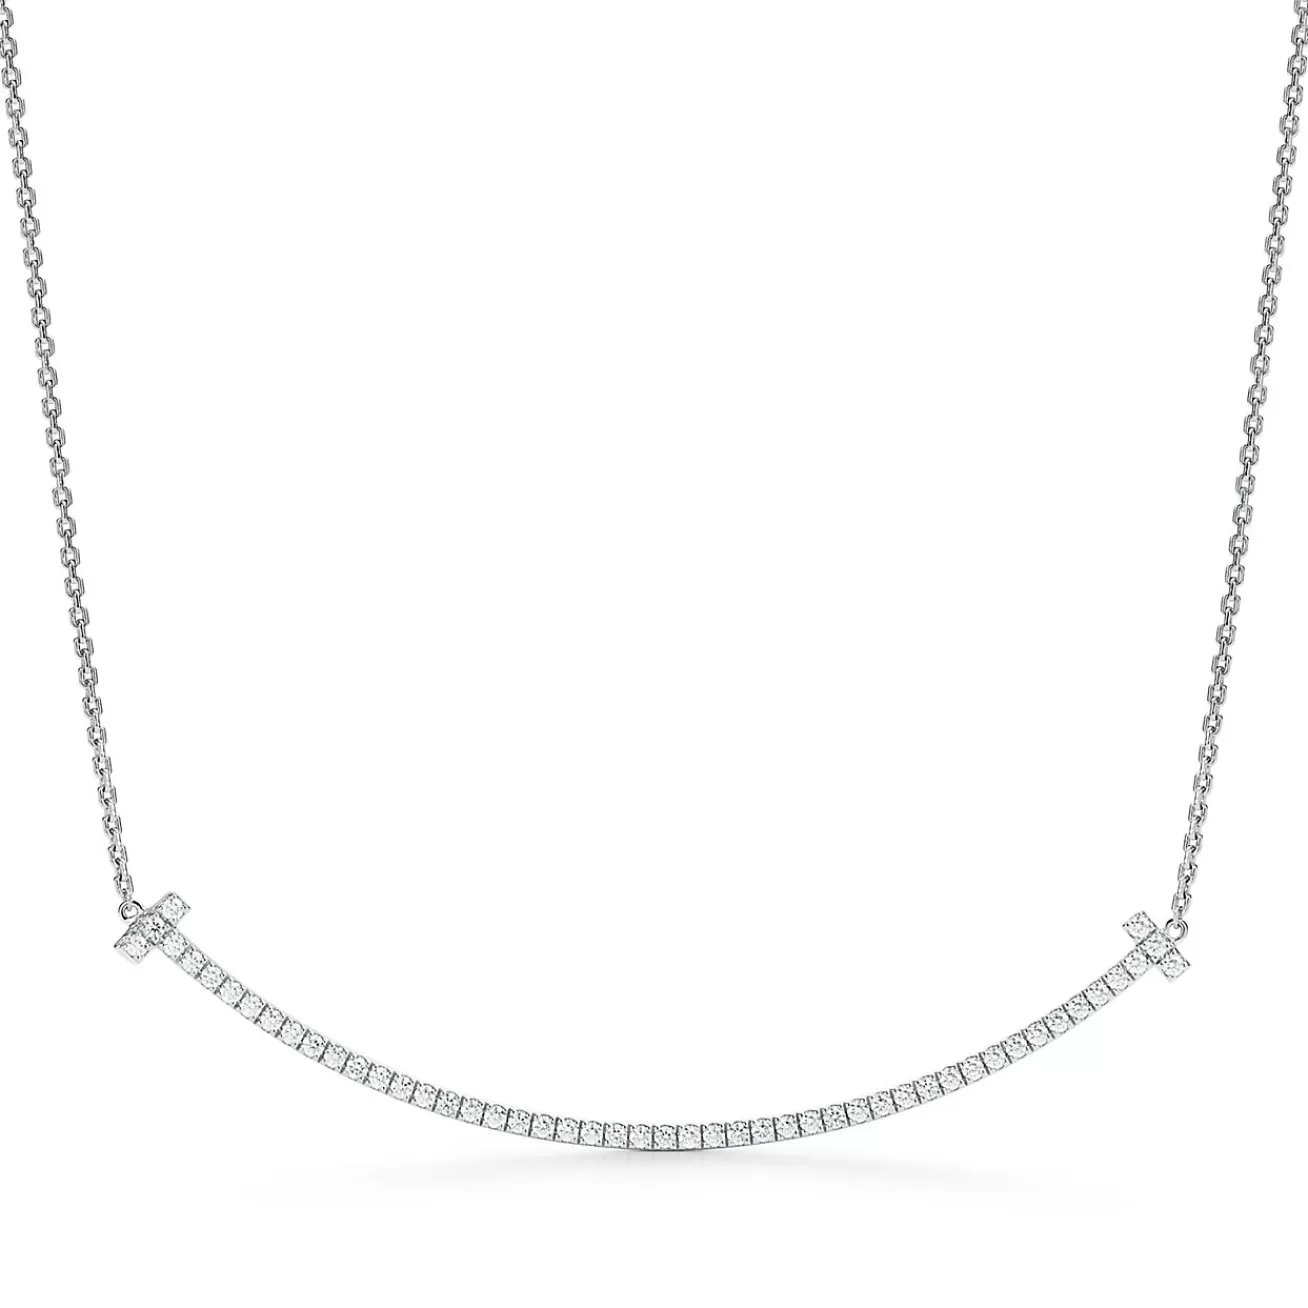 Tiffany & Co. Tiffany T extra large smile pendant in 18k white gold with diamonds. | ^ Necklaces & Pendants | Men's Jewelry